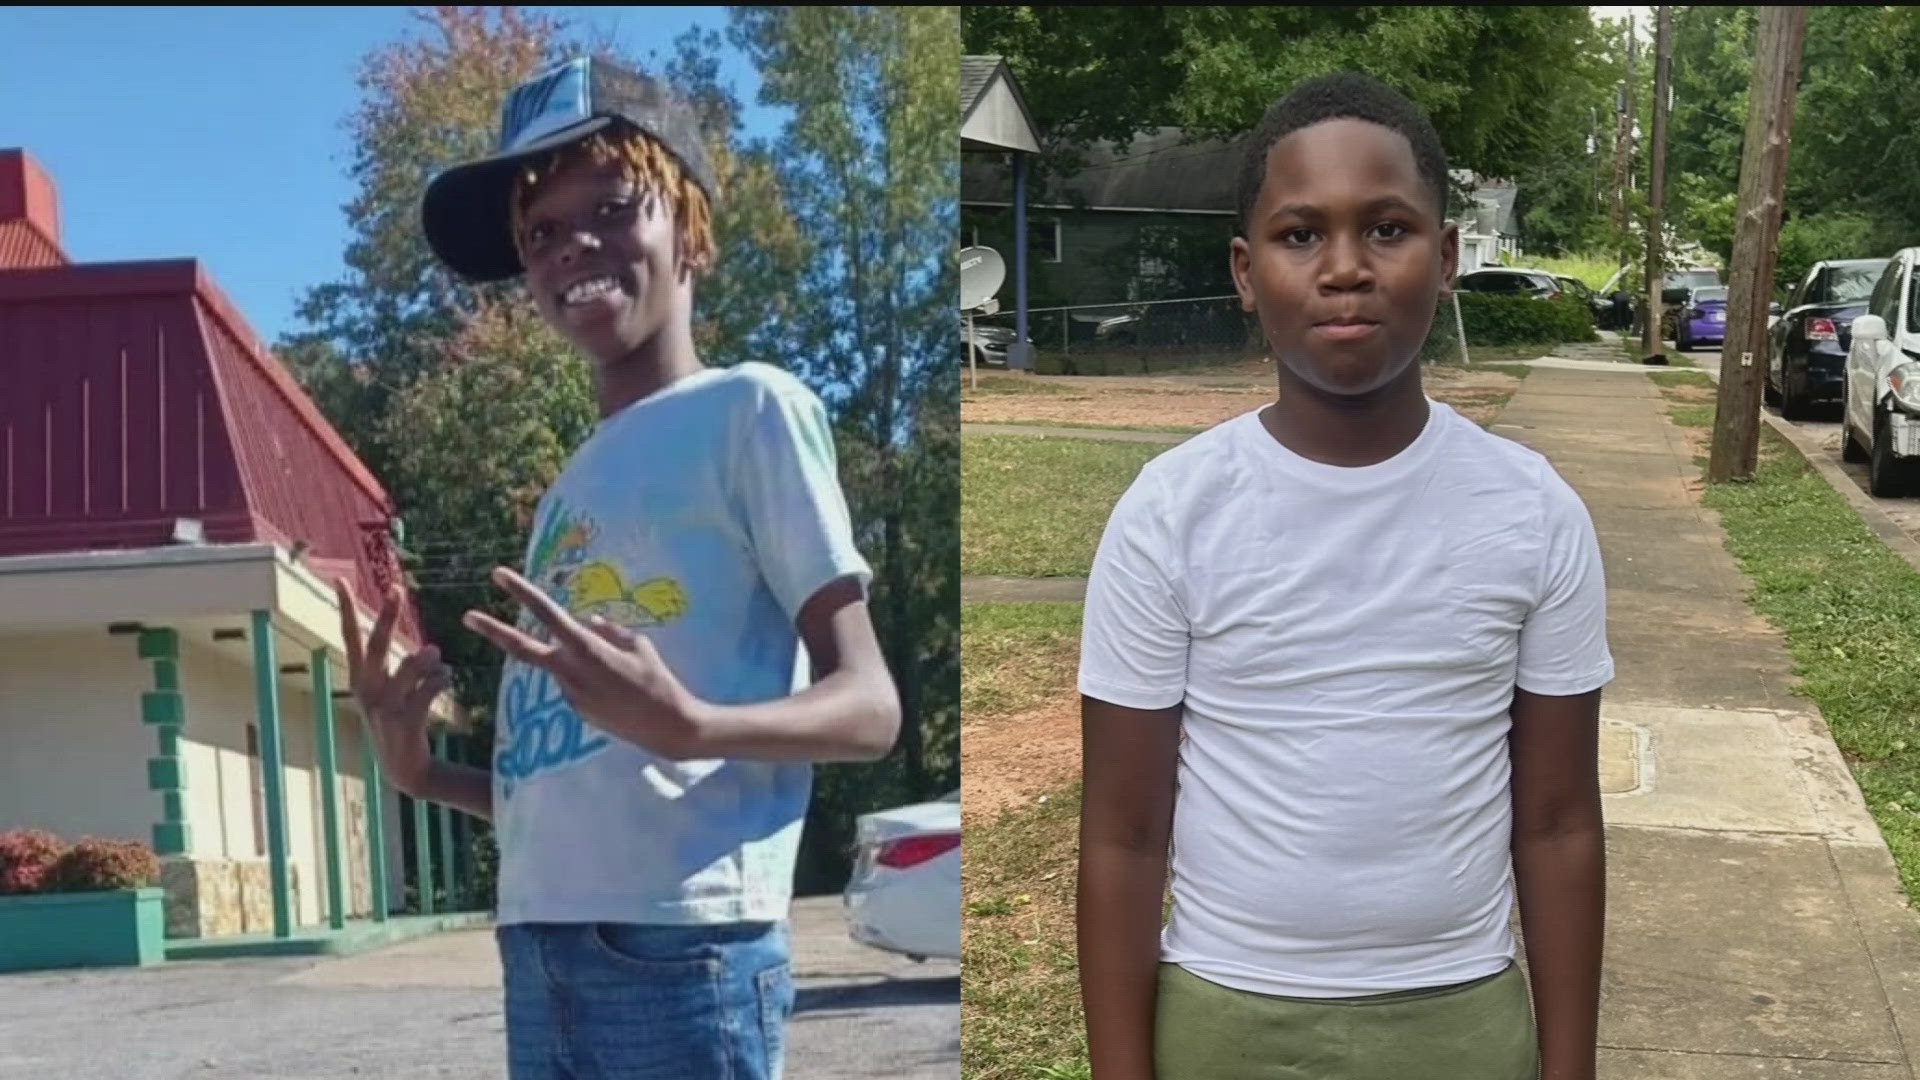 One of the two rising 8th-graders was shot and killed an hour into this 13th birthday, while the other just turned 13 a few days ago.